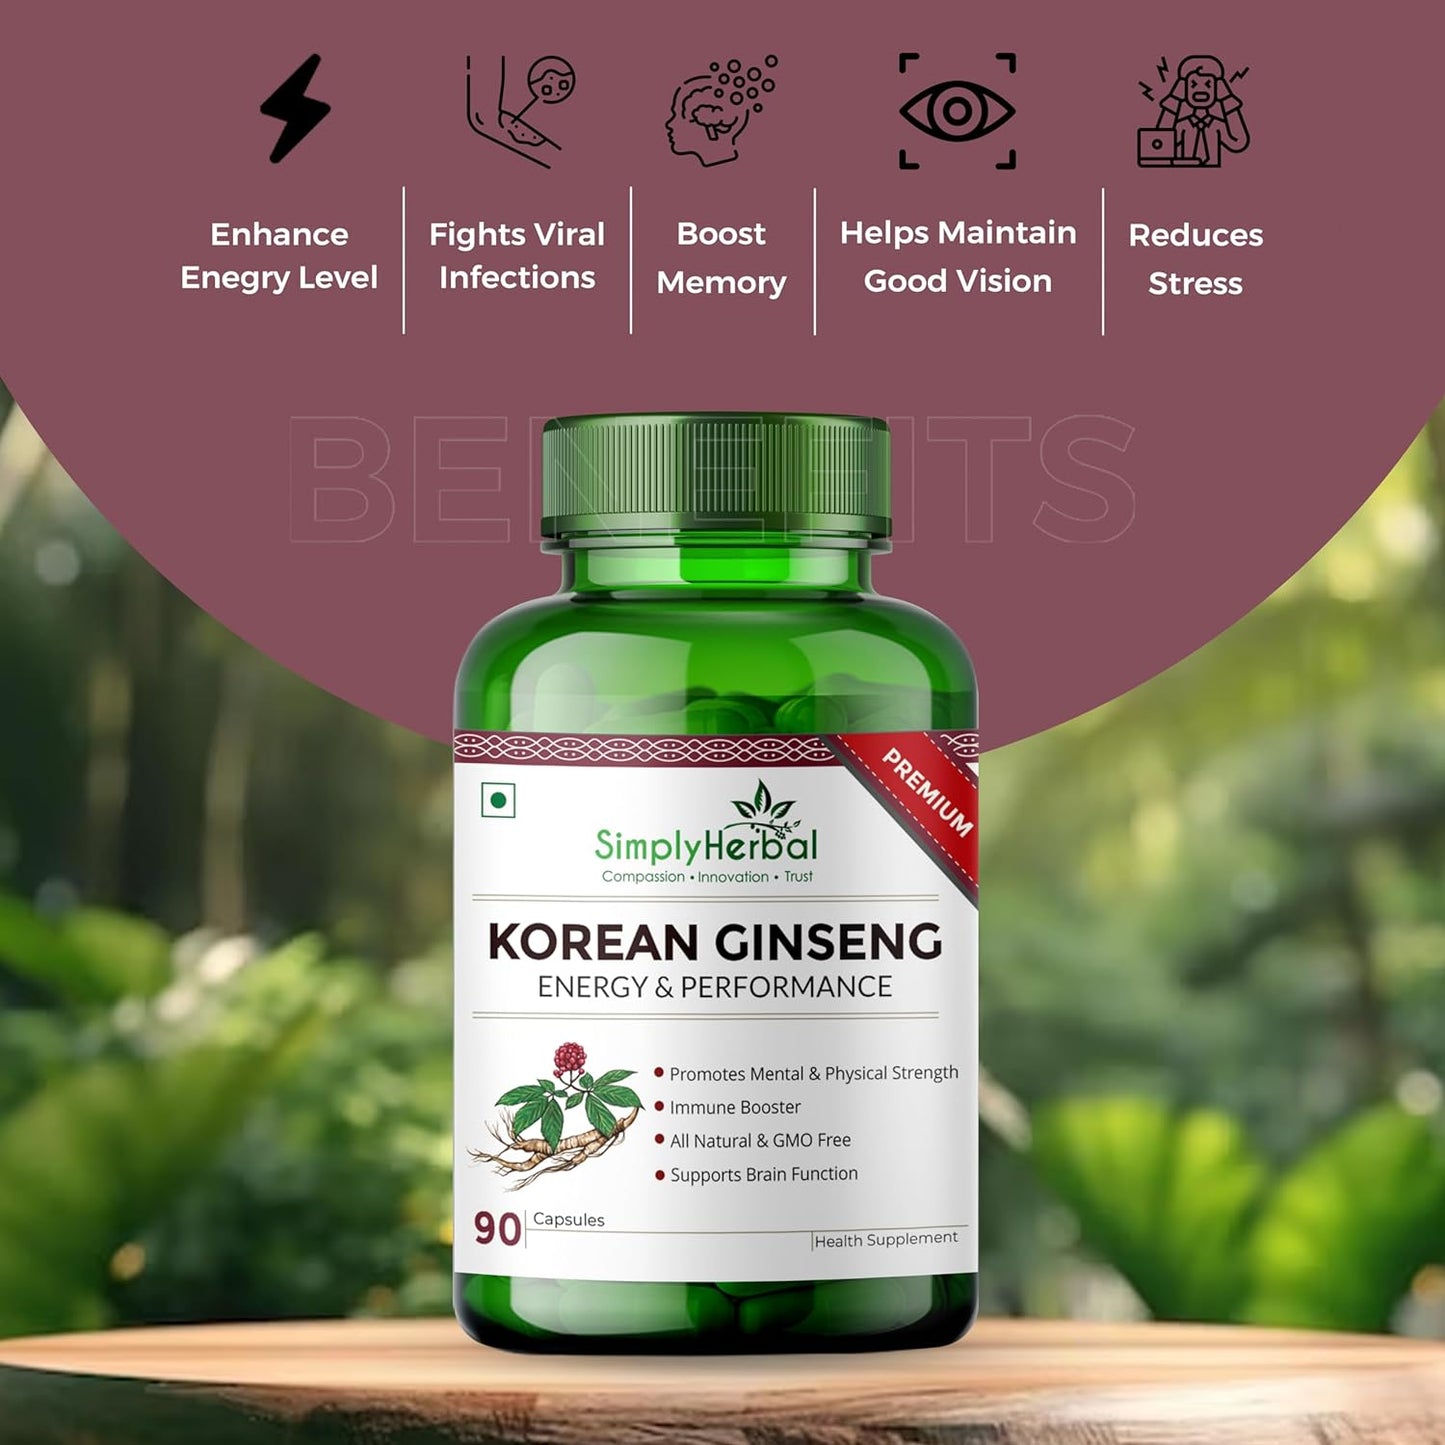 Simply Herbal Korean Red Ginseng For Brain Function, Energy & Performance 500mg -90 Capsules